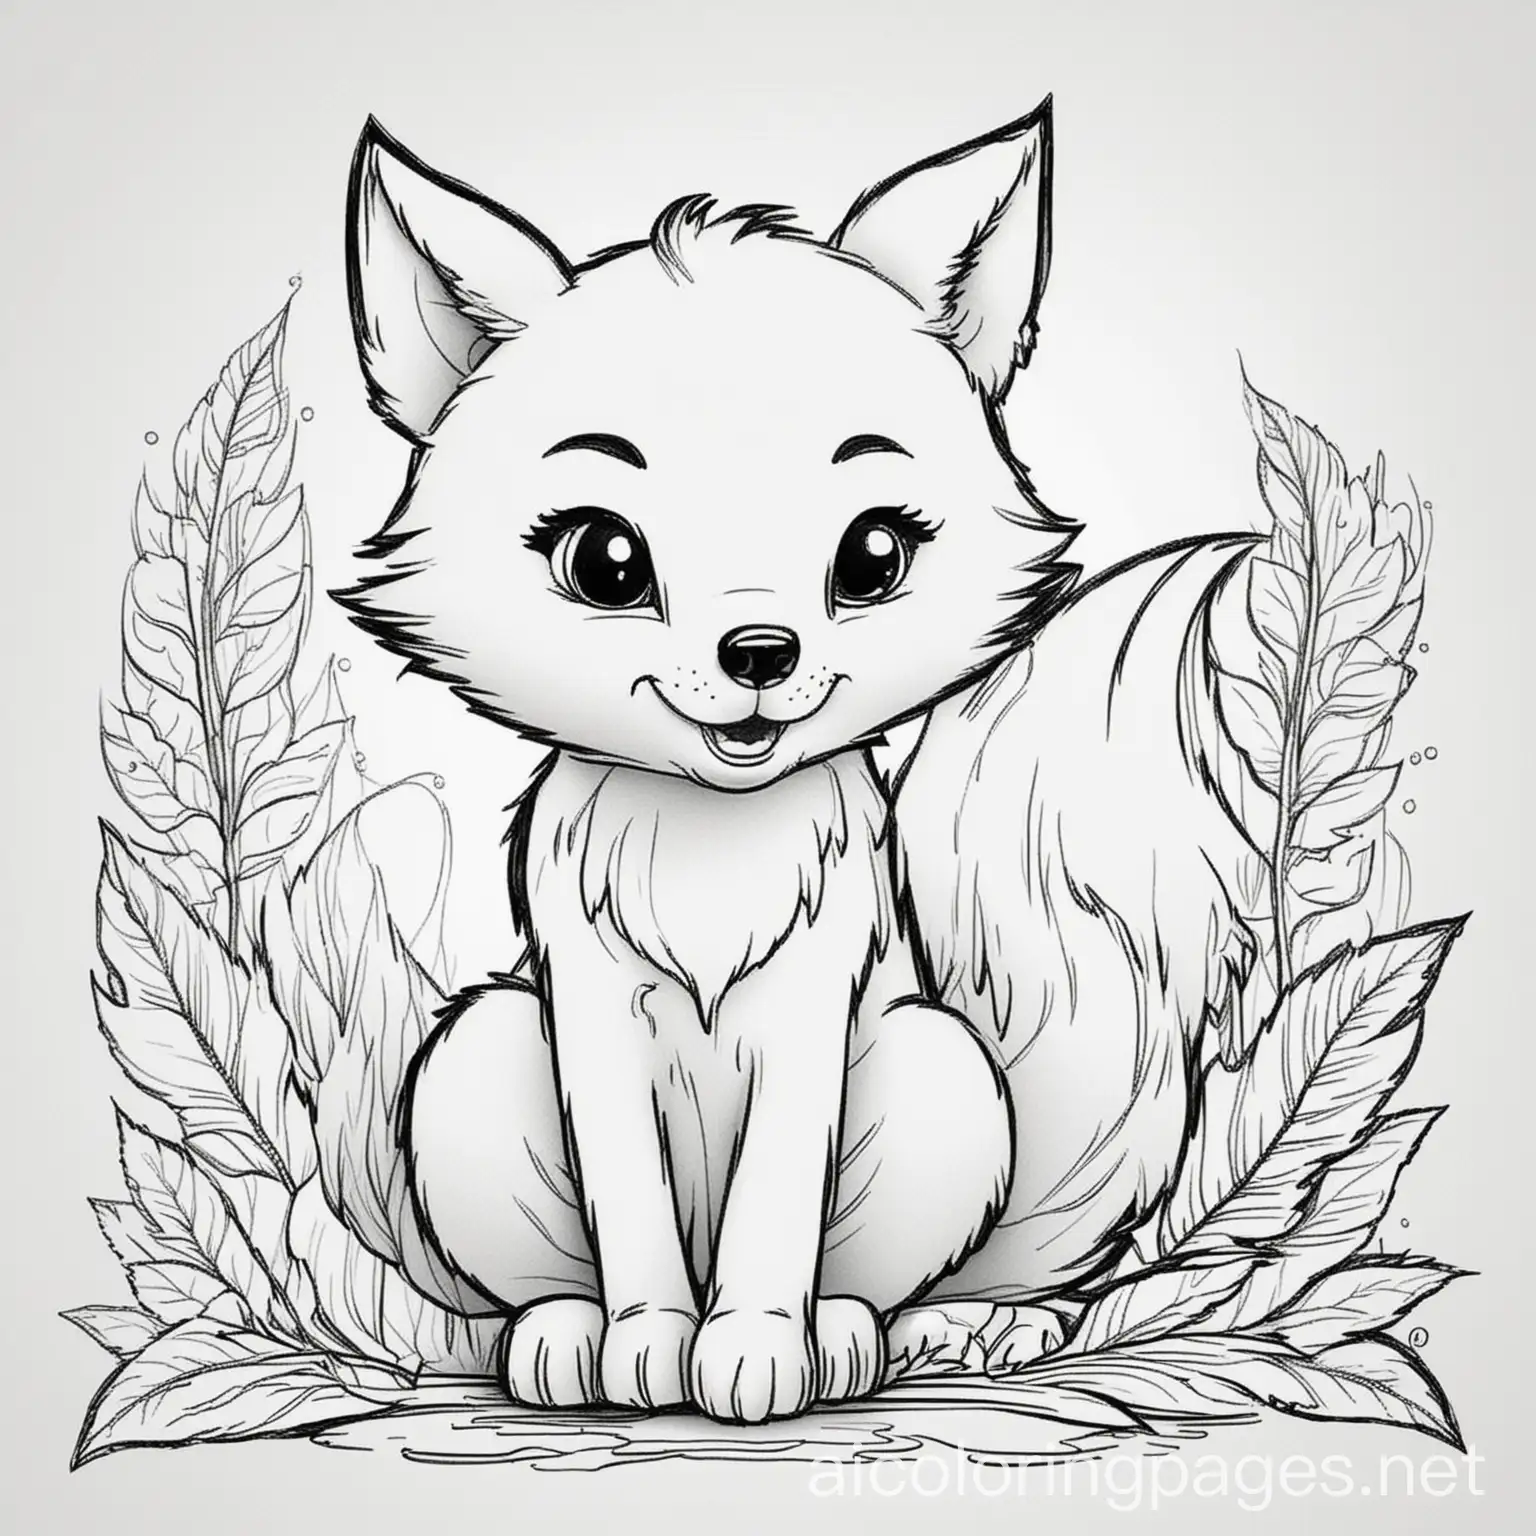 cute happy smiling fox baby black and white for colouring for children, Coloring Page, black and white, line art, white background, Simplicity, Ample White Space. The background of the coloring page is plain white to make it easy for young children to color within the lines. The outlines of all the subjects are easy to distinguish, making it simple for kids to color without too much difficulty, Coloring Page, black and white, line art, white background, Simplicity, Ample White Space. The background of the coloring page is plain white to make it easy for young children to color within the lines. The outlines of all the subjects are easy to distinguish, making it simple for kids to color without too much difficulty, Coloring Page, black and white, line art, white background, Simplicity, Ample White Space. The background of the coloring page is plain white to make it easy for young children to color within the lines. The outlines of all the subjects are easy to distinguish, making it simple for kids to color without too much difficulty